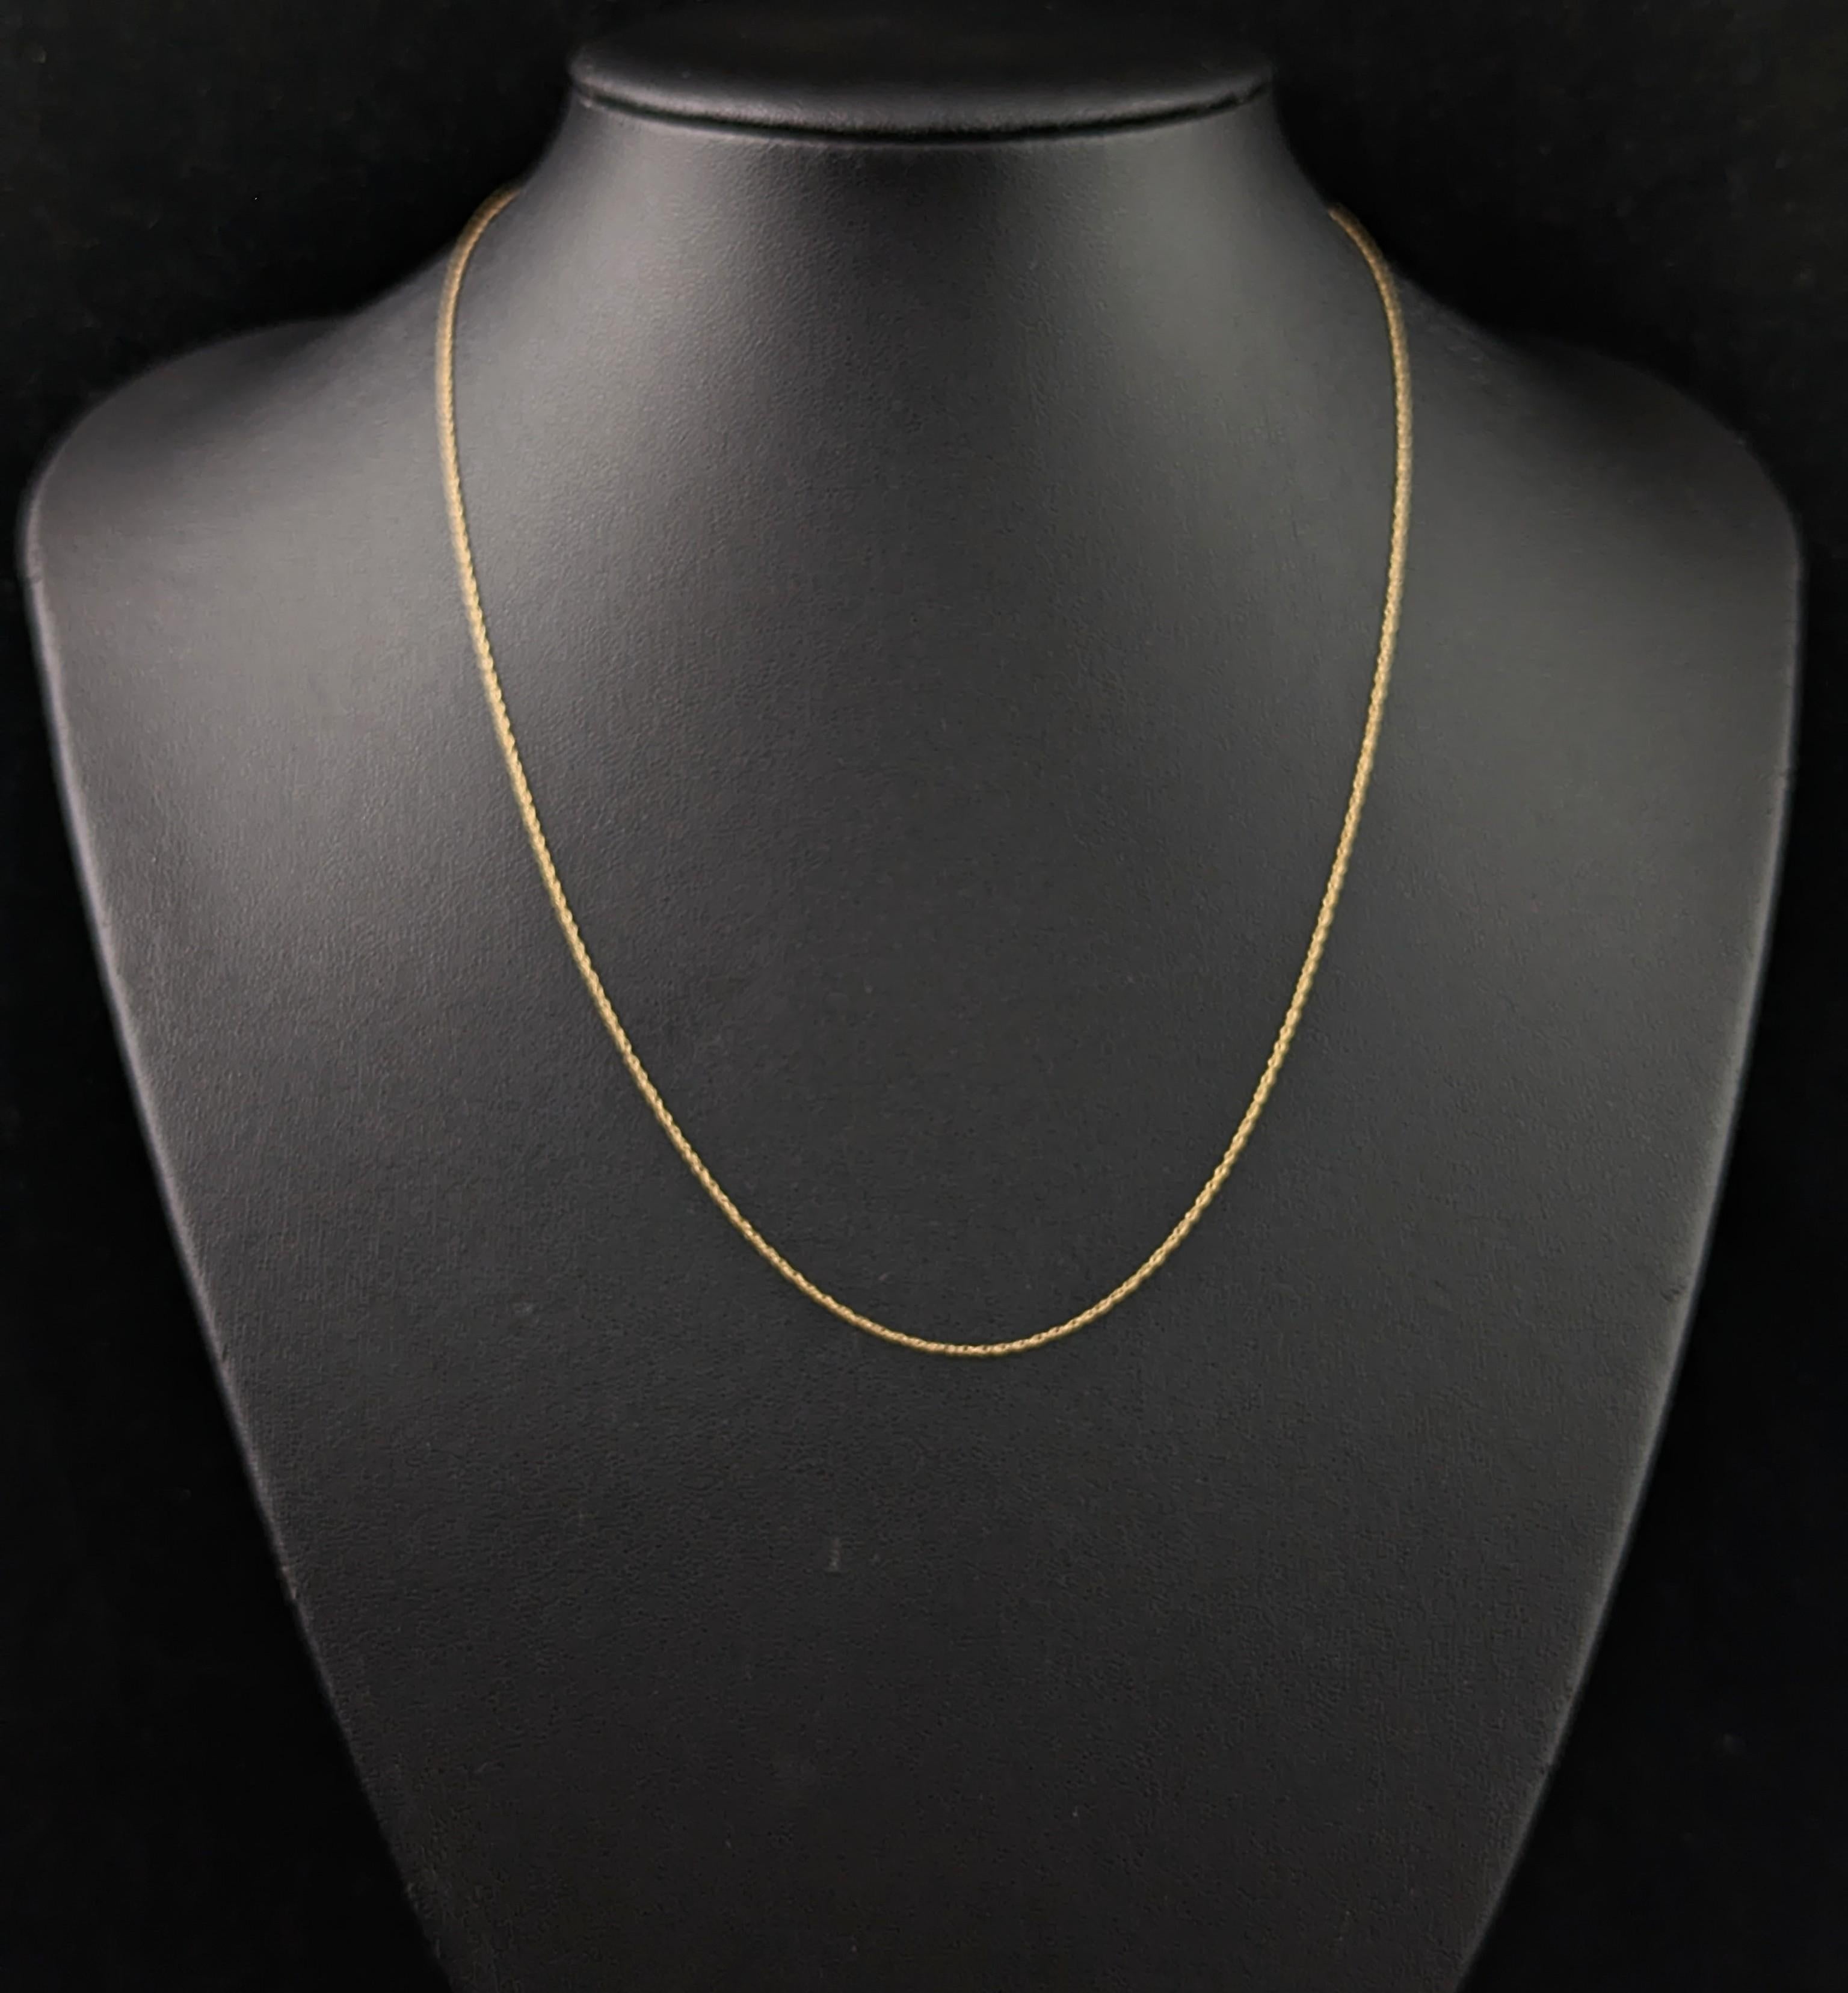 A fine dainty vintage 9ct gold trace chain such as this is the perfect accompaniment to your favourite small lockets, pendants and charms.

It is a fine interlinked rolo trace link in a rich yellow gold with a spring ring clasp.

It is a good length